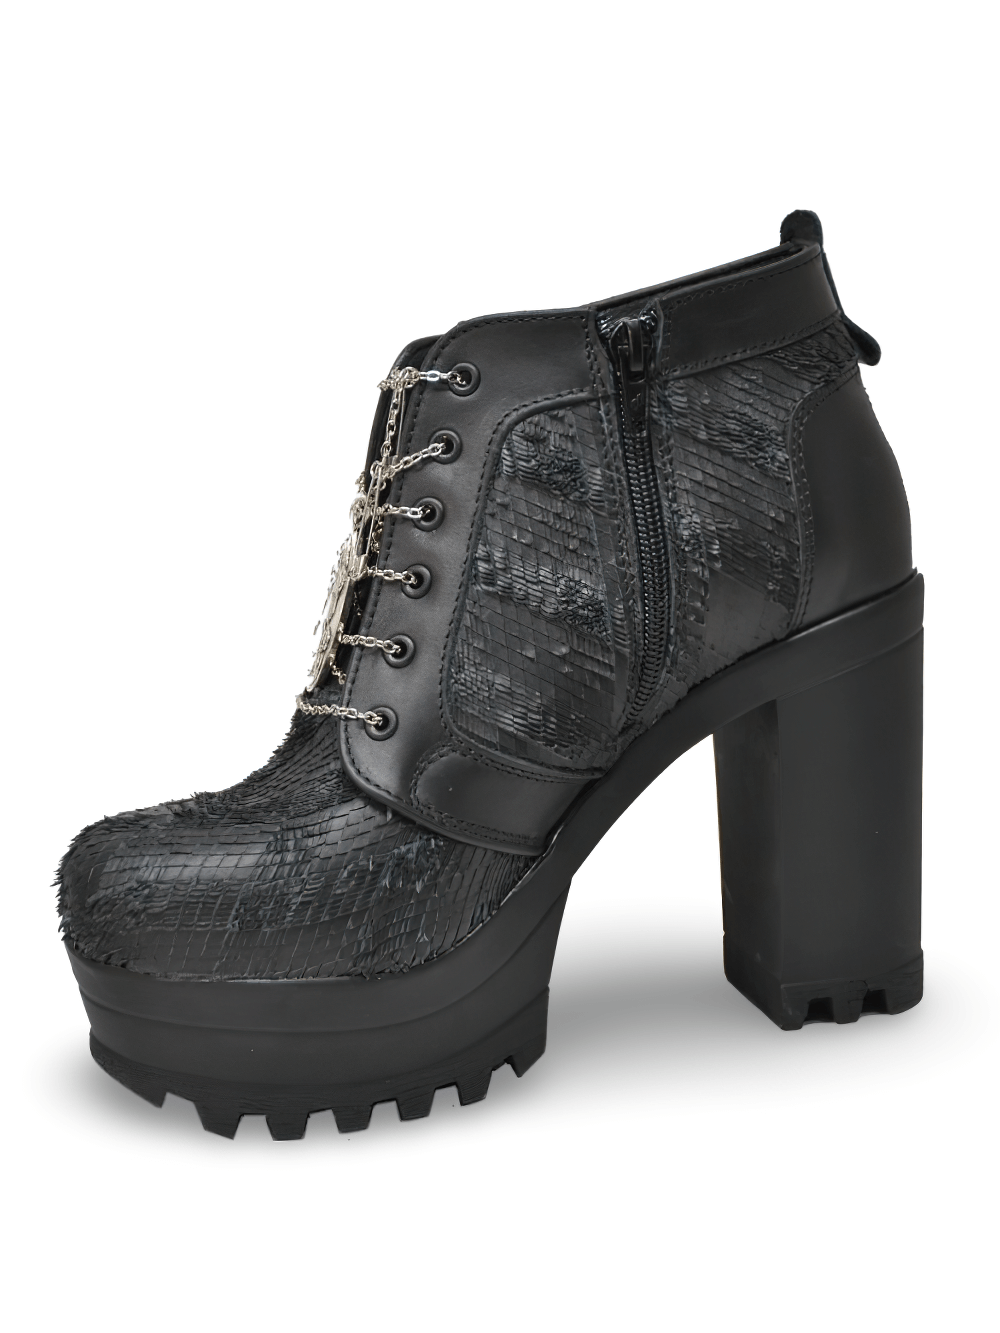 Chic Round Toe Black Booties with Zip and Platform Sole